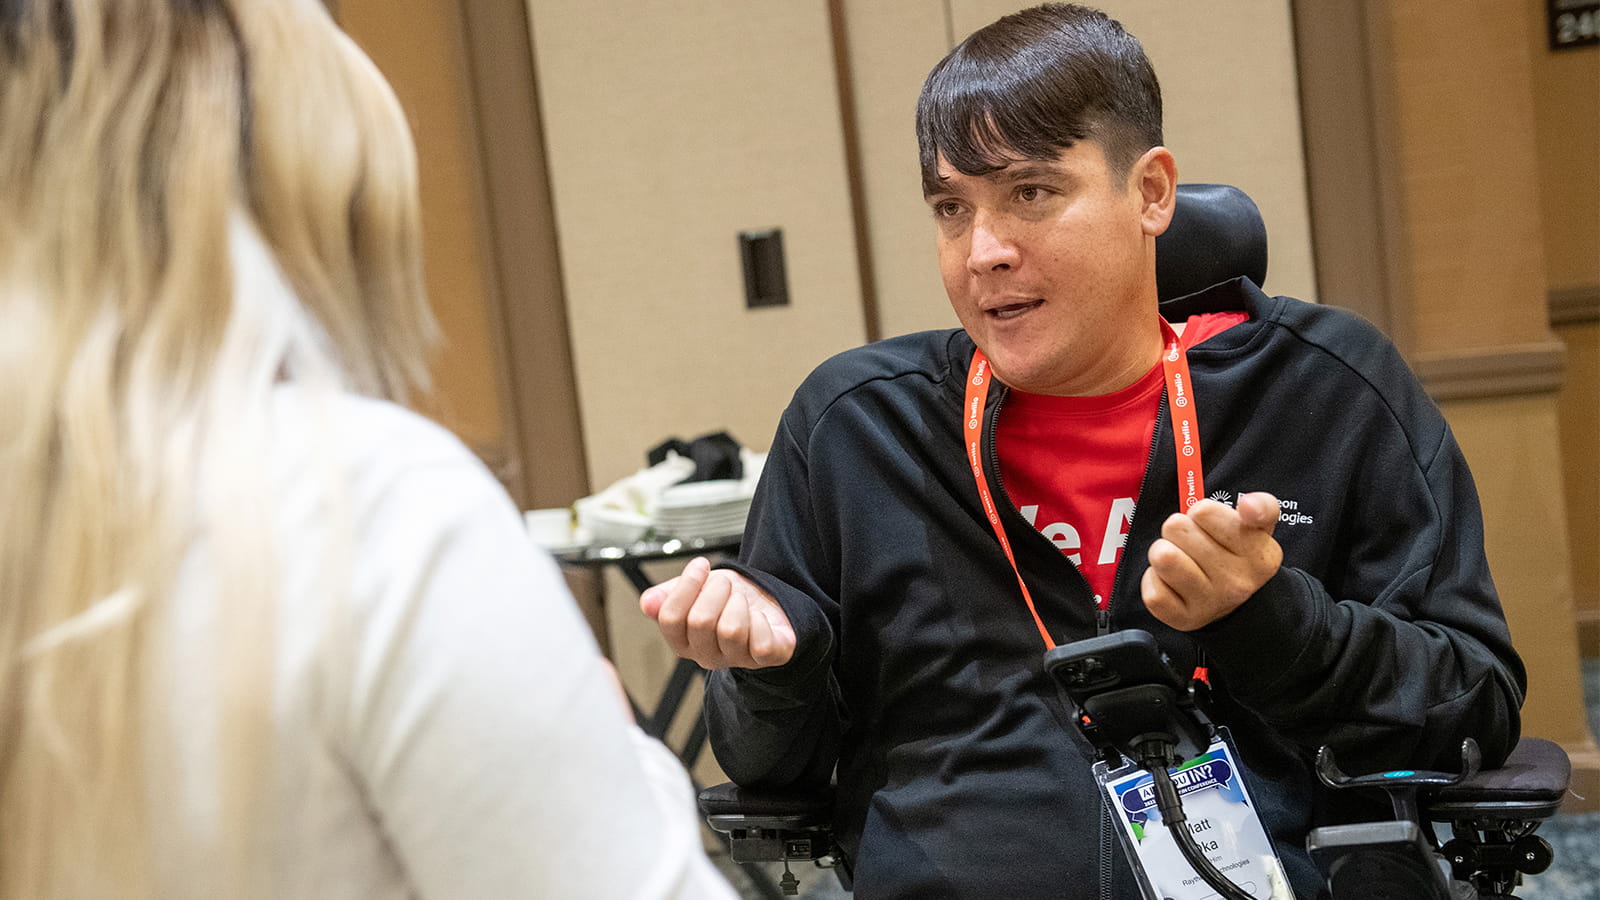 Matt Oka, the chair of Raytheon Technologies’ employee resource group for people with disabilities, speaks with a colleague at the company’s Employee Resource Group Leadership Summit. Employee resource groups are a key part of Raytheon Technologies’ strategy to strengthen its culture of inclusion.